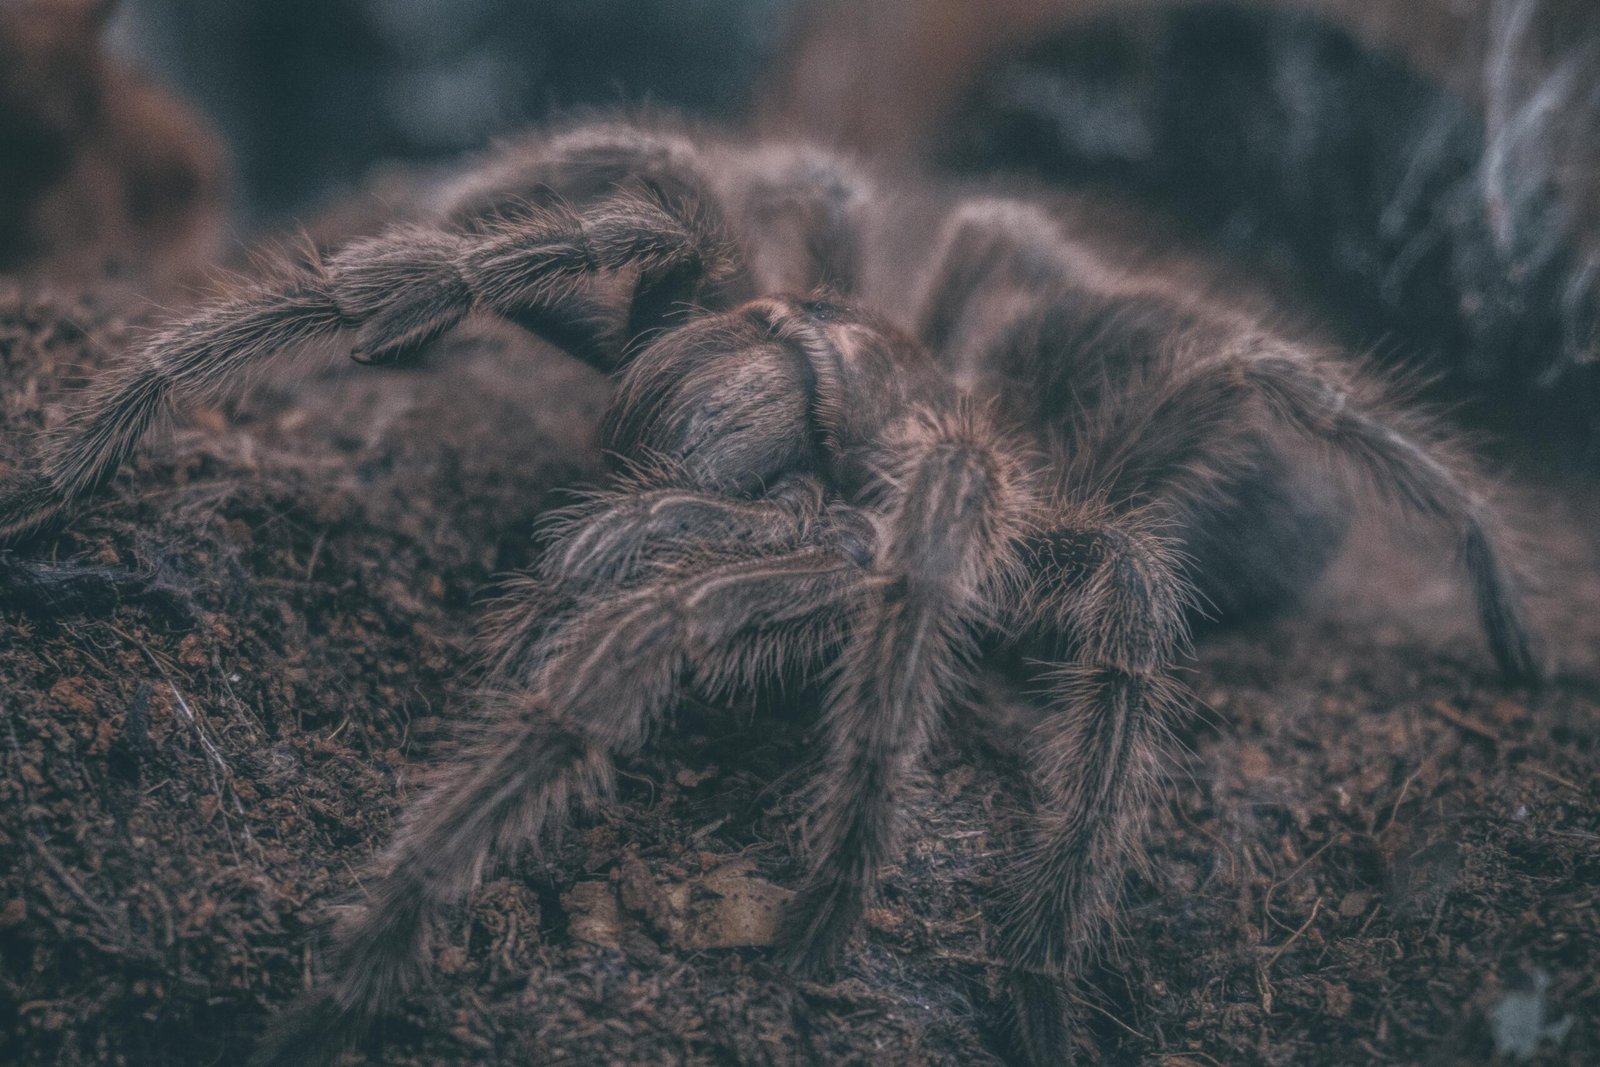 When Should I Separate Tarantula Spiderlings From Each Other?